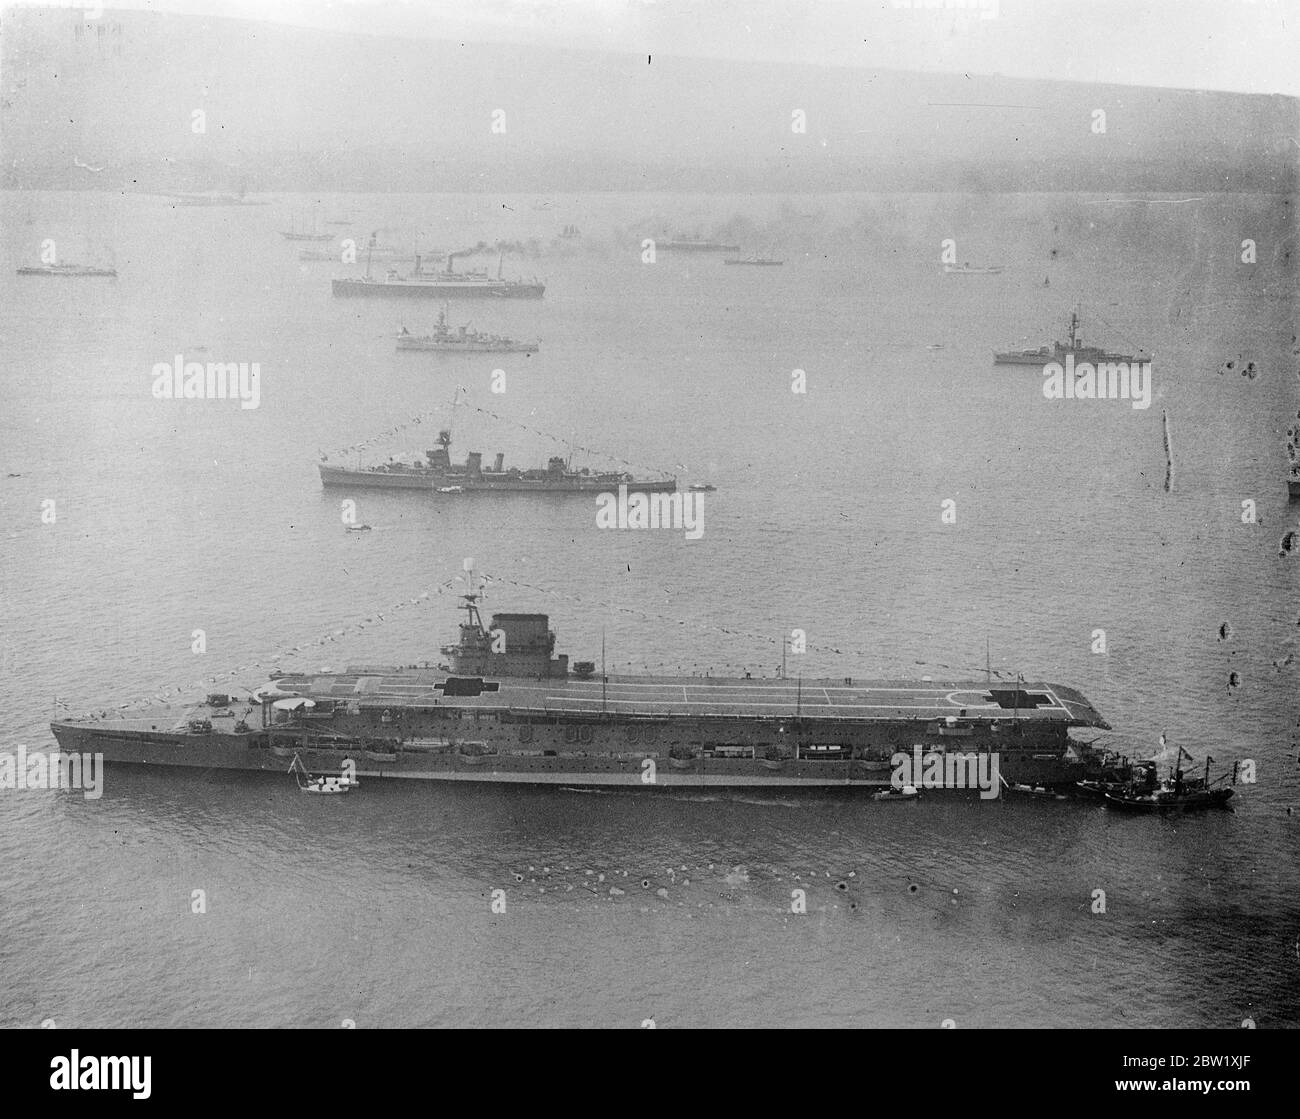 Fleet 'dressed' at Spithead for Kings naval review. An aerial view of warships gaily 'dressed' at Spithead for the Coronation review of the fleet by the King and Queen. In foreground is HMS Glorious with both her deck lifts down. 20 May 1937 Stock Photo